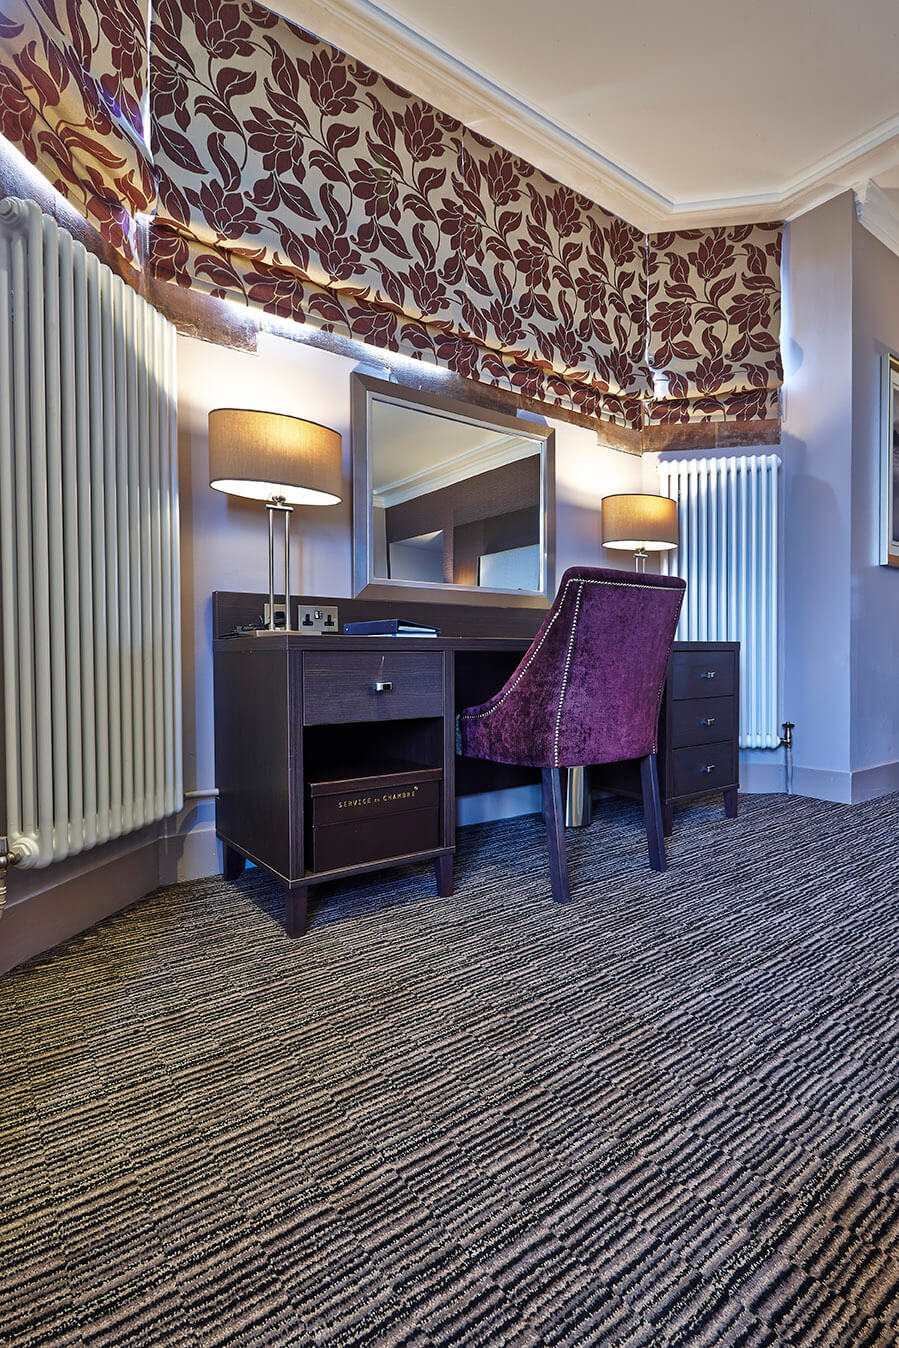 Abbey Hotel dressing room, with a black, grey and cream striped design carpet, by Wilton Carpets